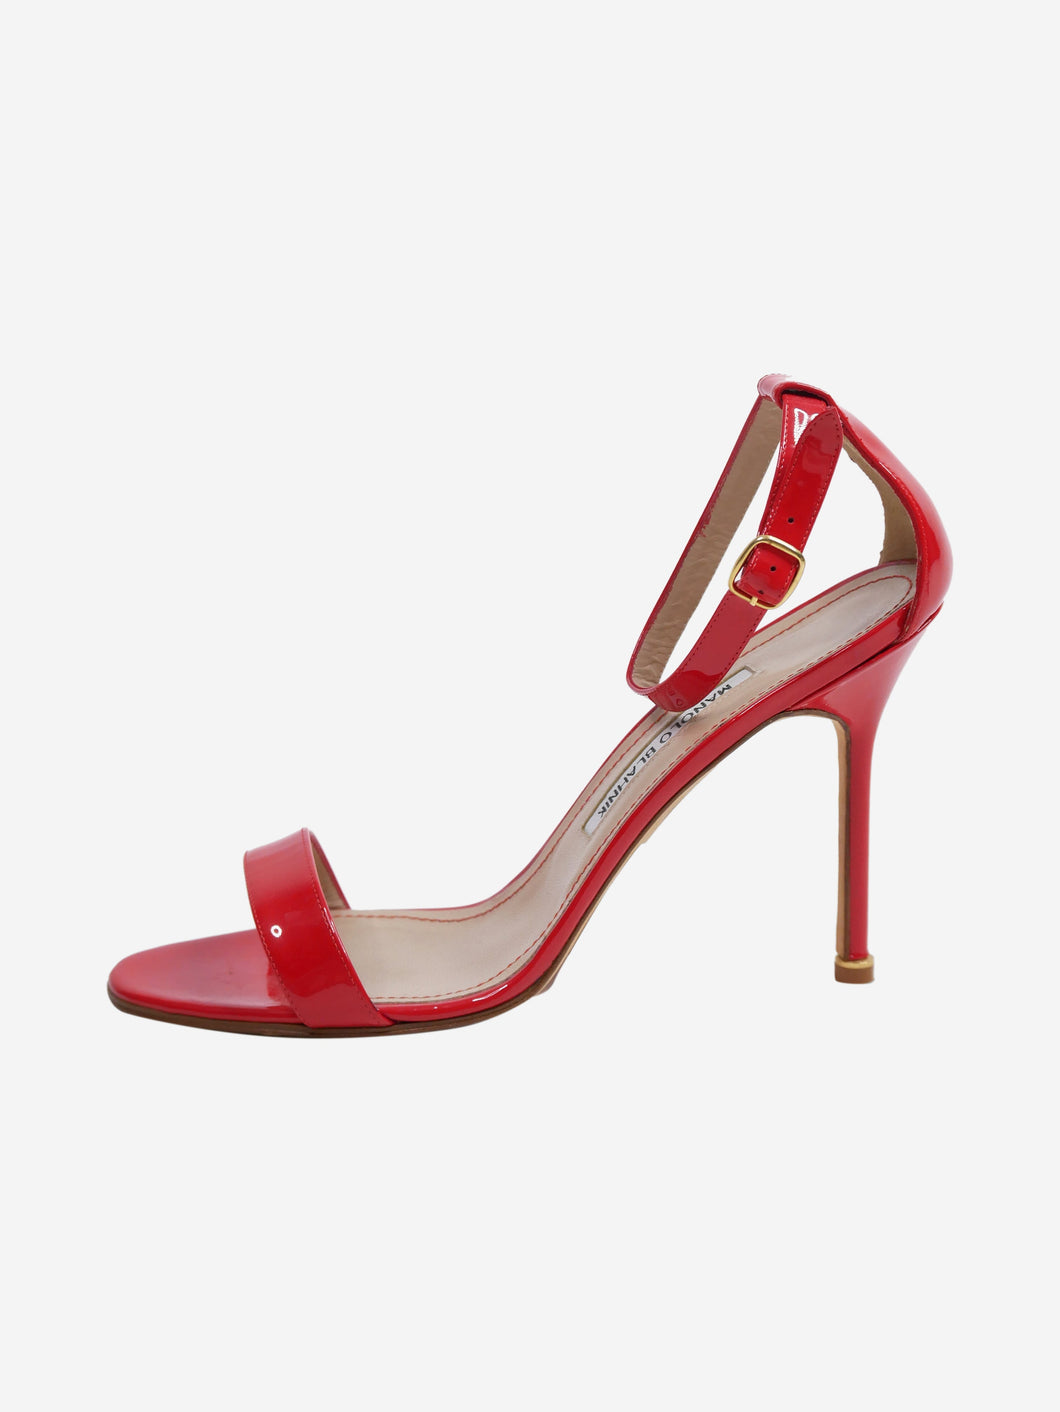 Red patent sandal heels with ankle strap and open toe - size EU 40.5 Heels Manolo Blahnik 